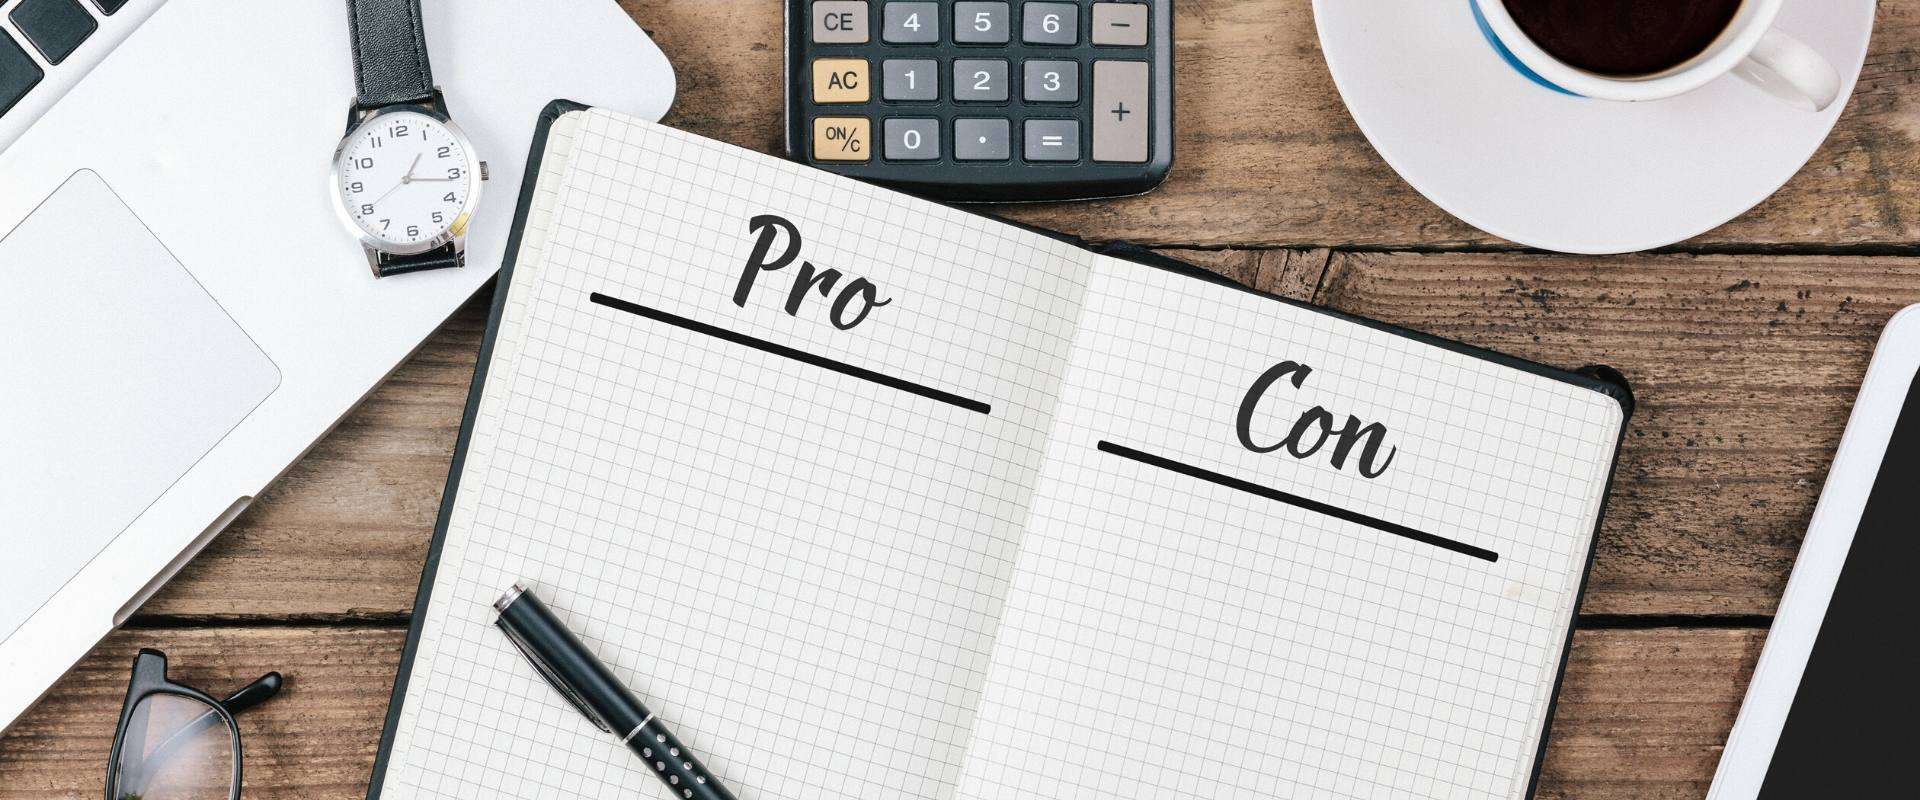 The Pros and Cons of PEO Companies